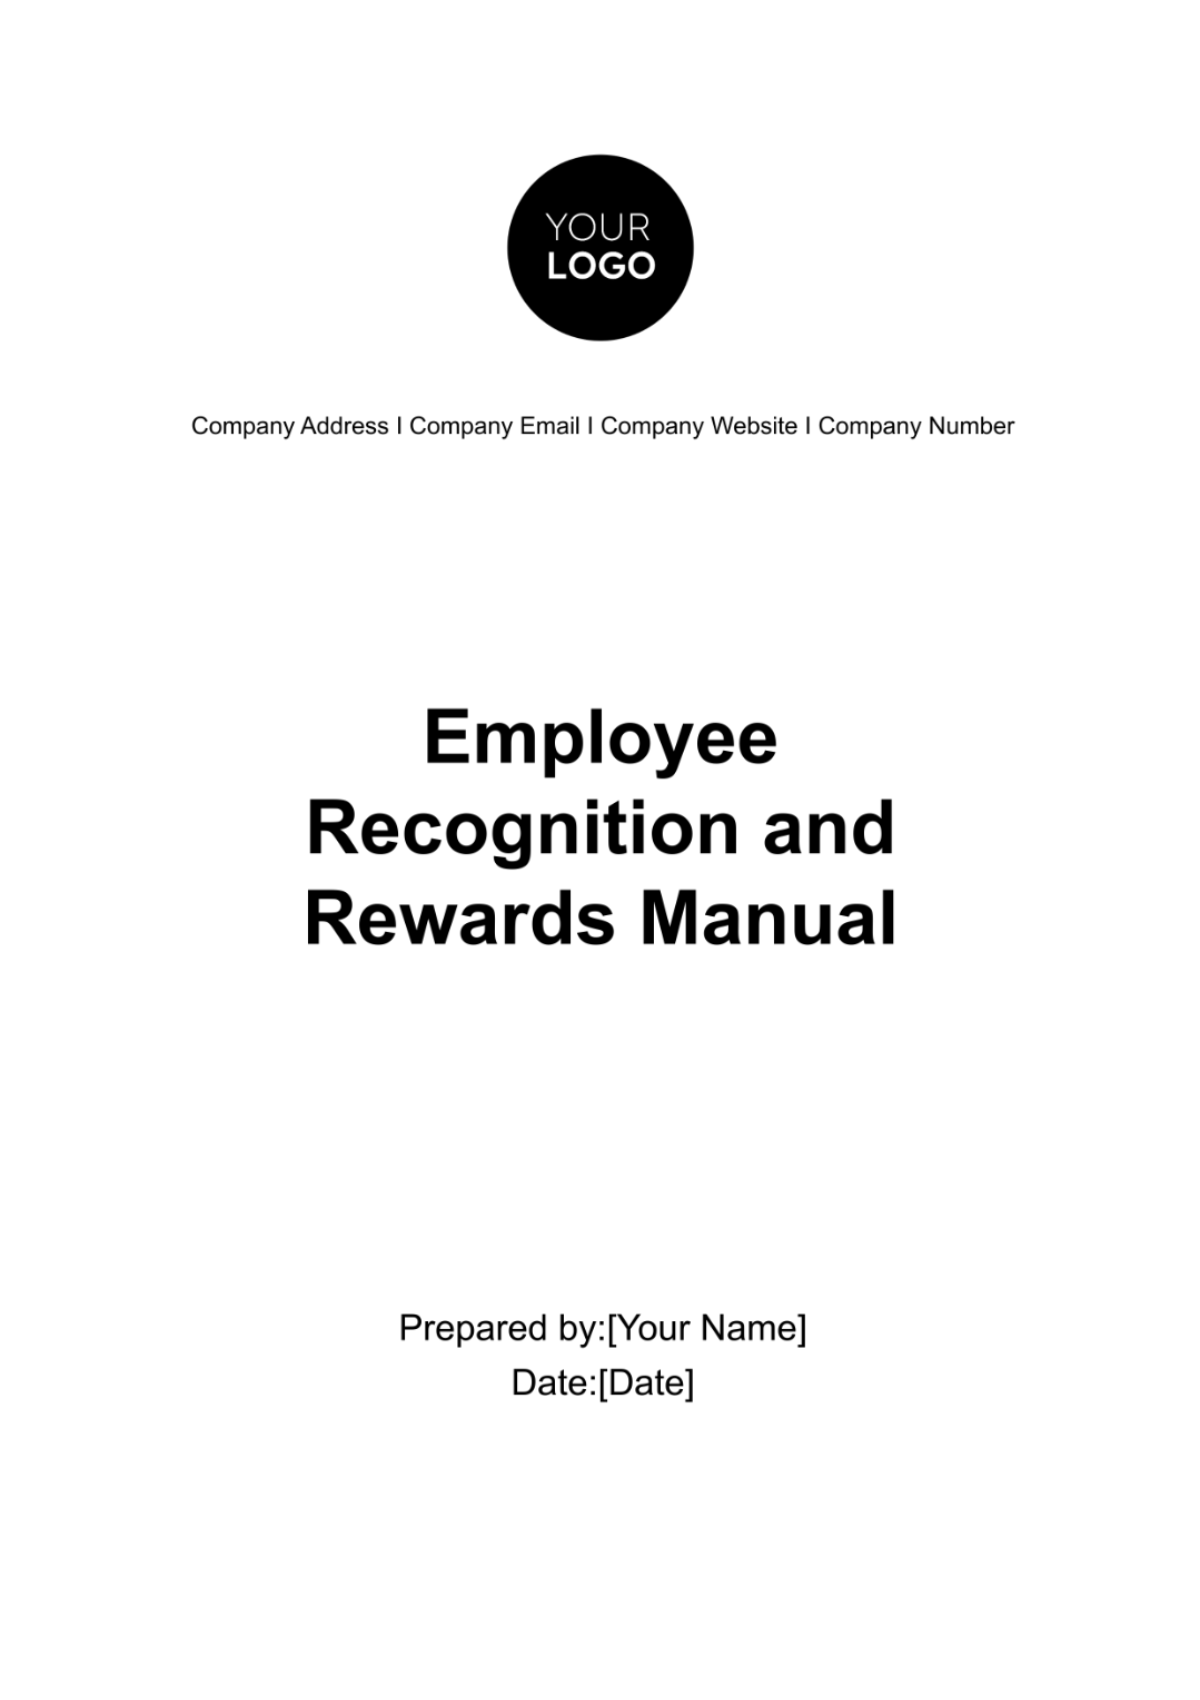 Employee Recognition and Rewards Manual HR Template